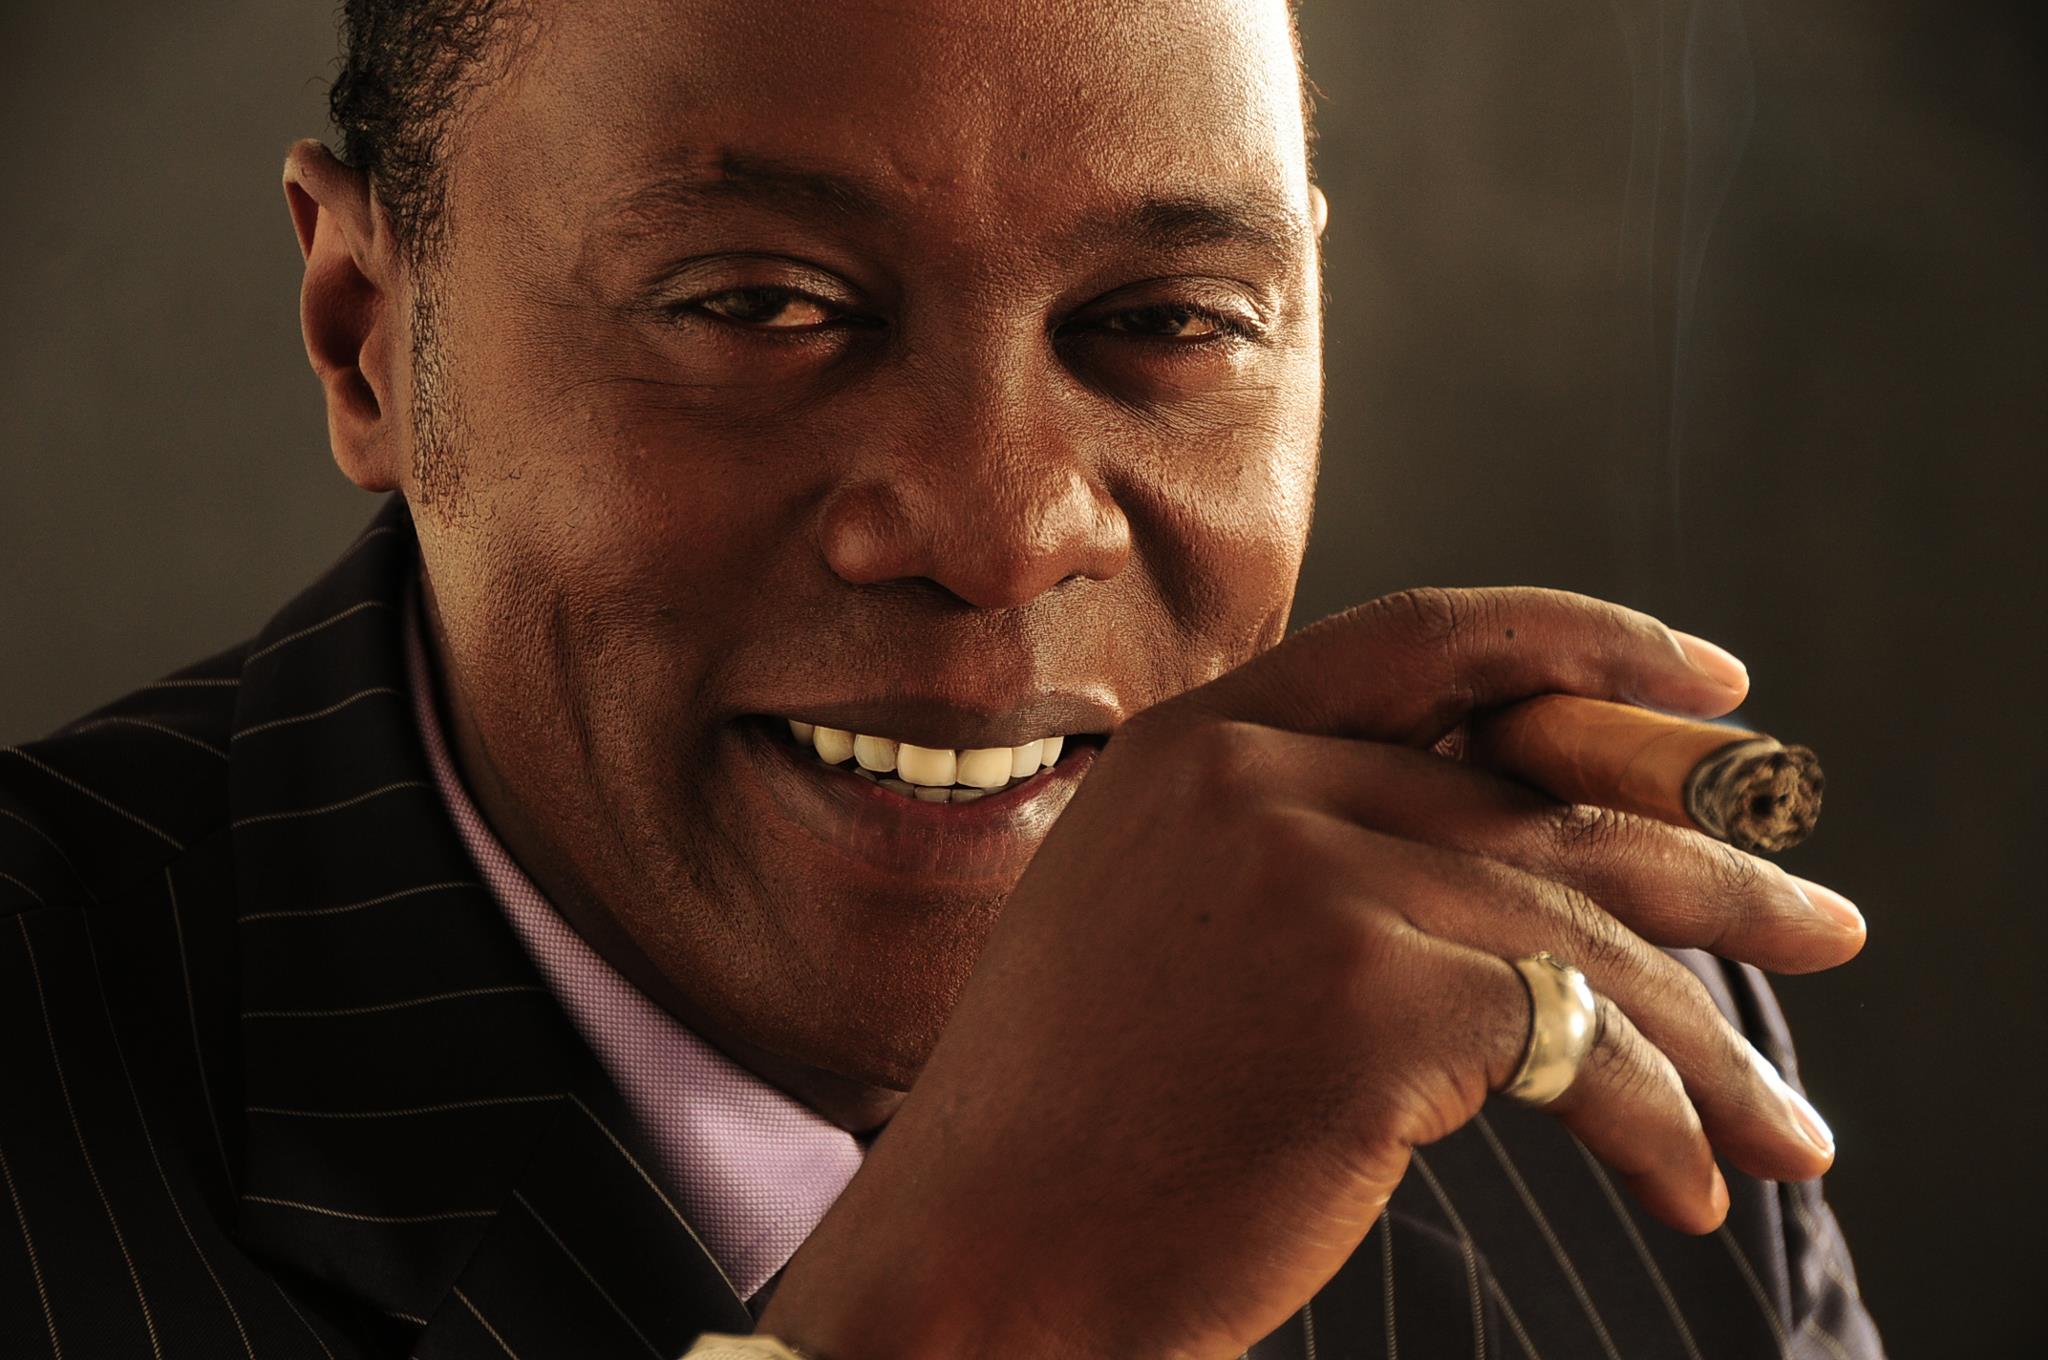 Shortly after announcing he was headed for Citizen, Jeff Koinange trolled by Waihiga Mwaura’s fans. See what they told him